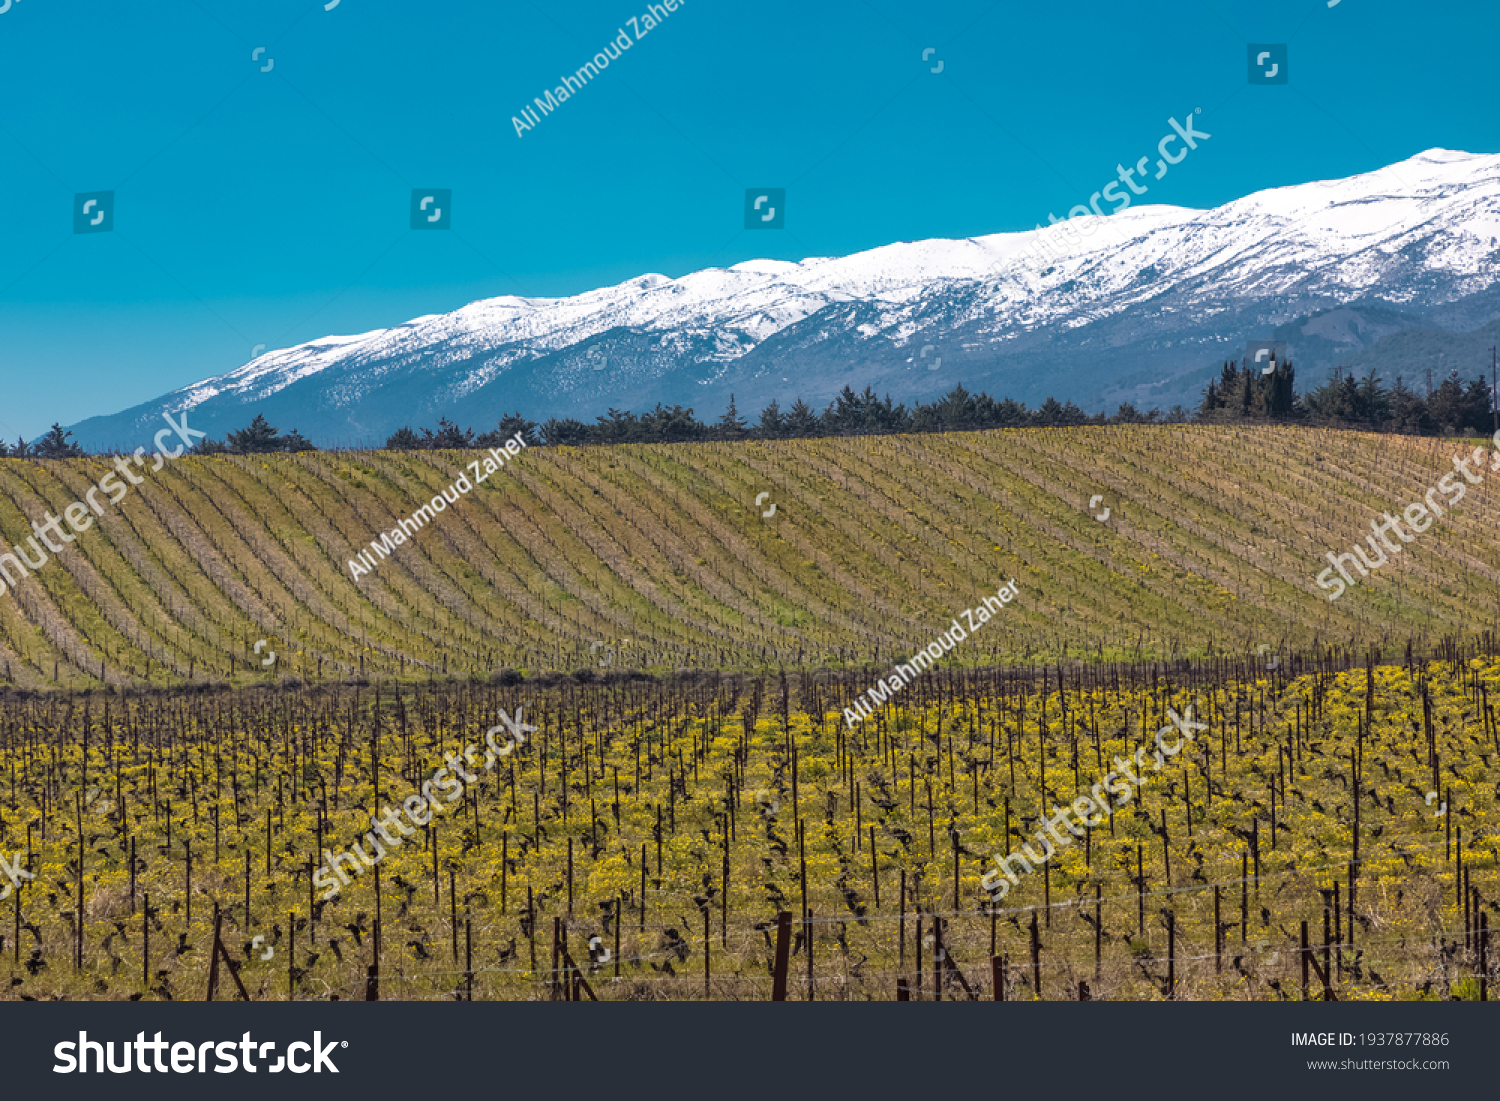 Grapes fields and a snowy mountain at bekaa lebanon #1937877886